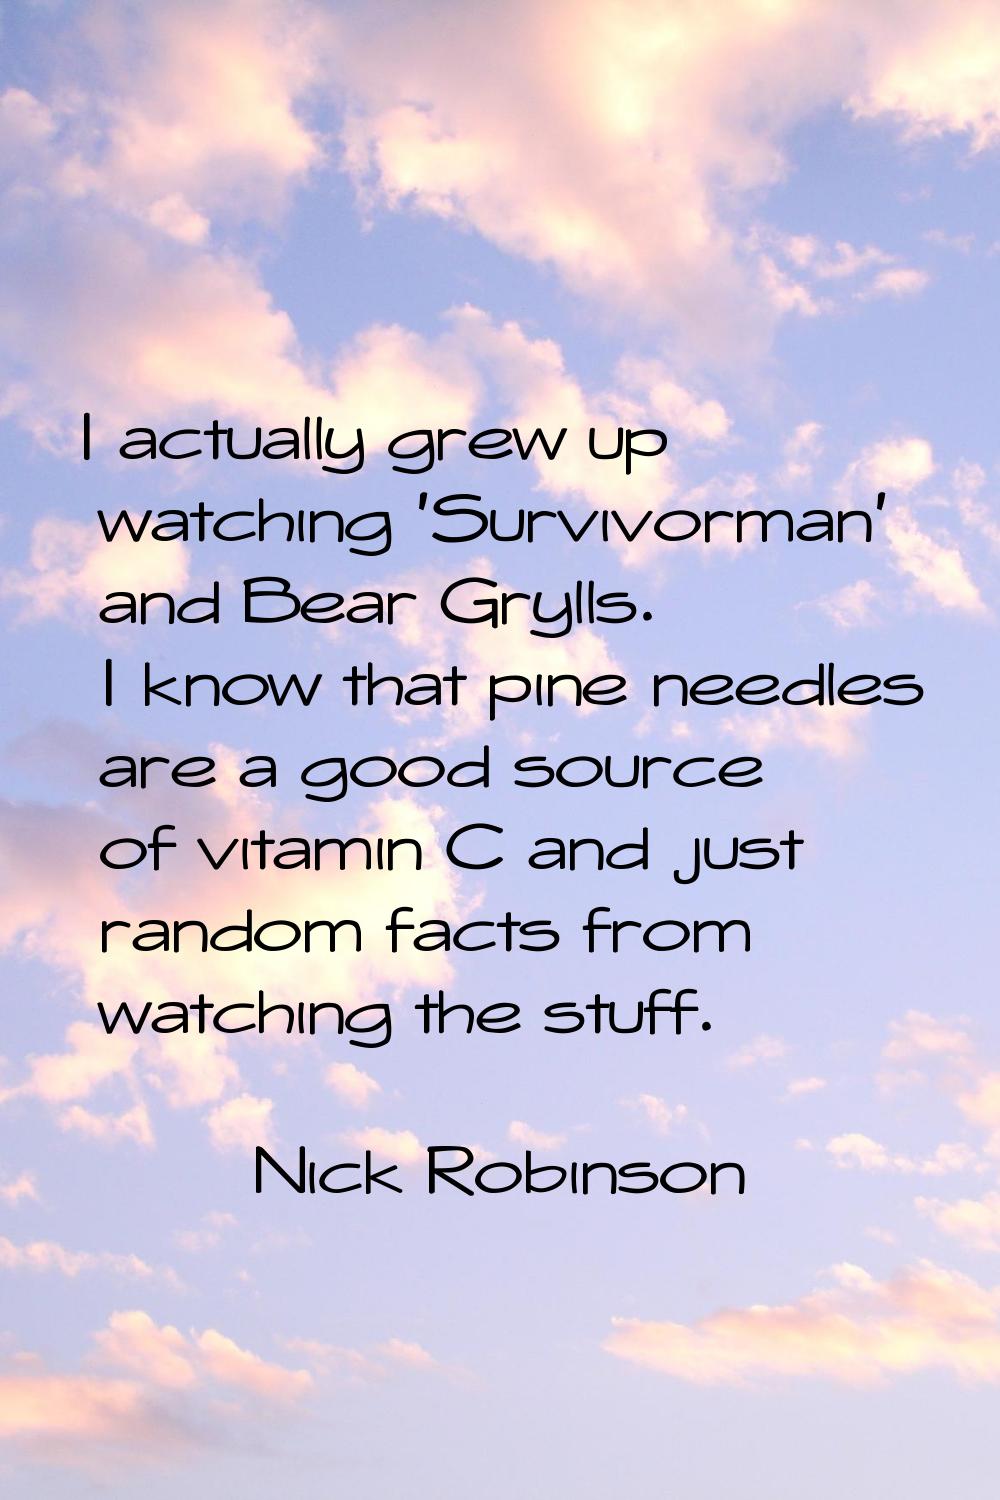 I actually grew up watching 'Survivorman' and Bear Grylls. I know that pine needles are a good sour